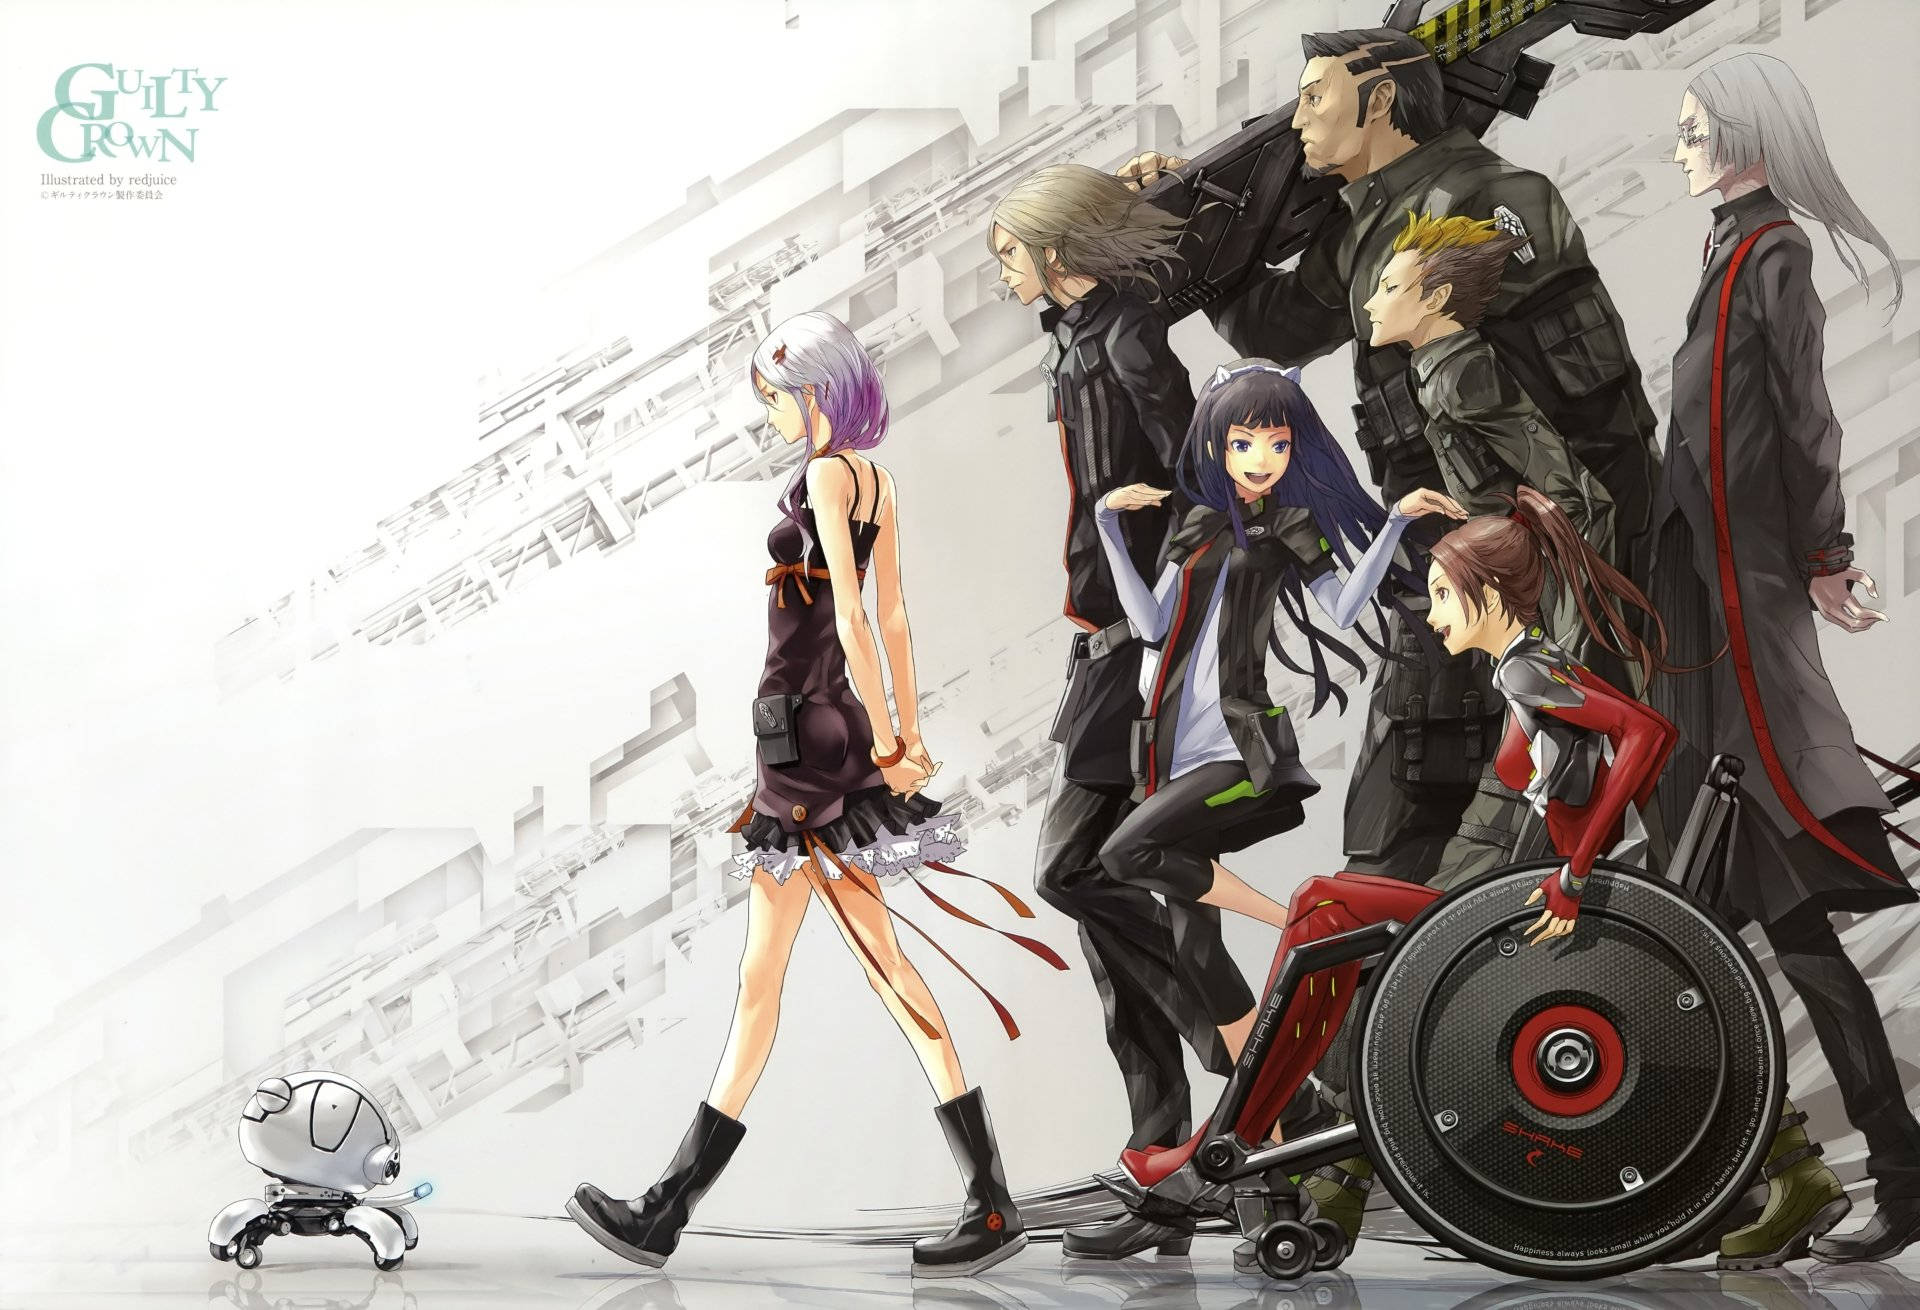 Guilty Crown Casts While Walking Wallpaper